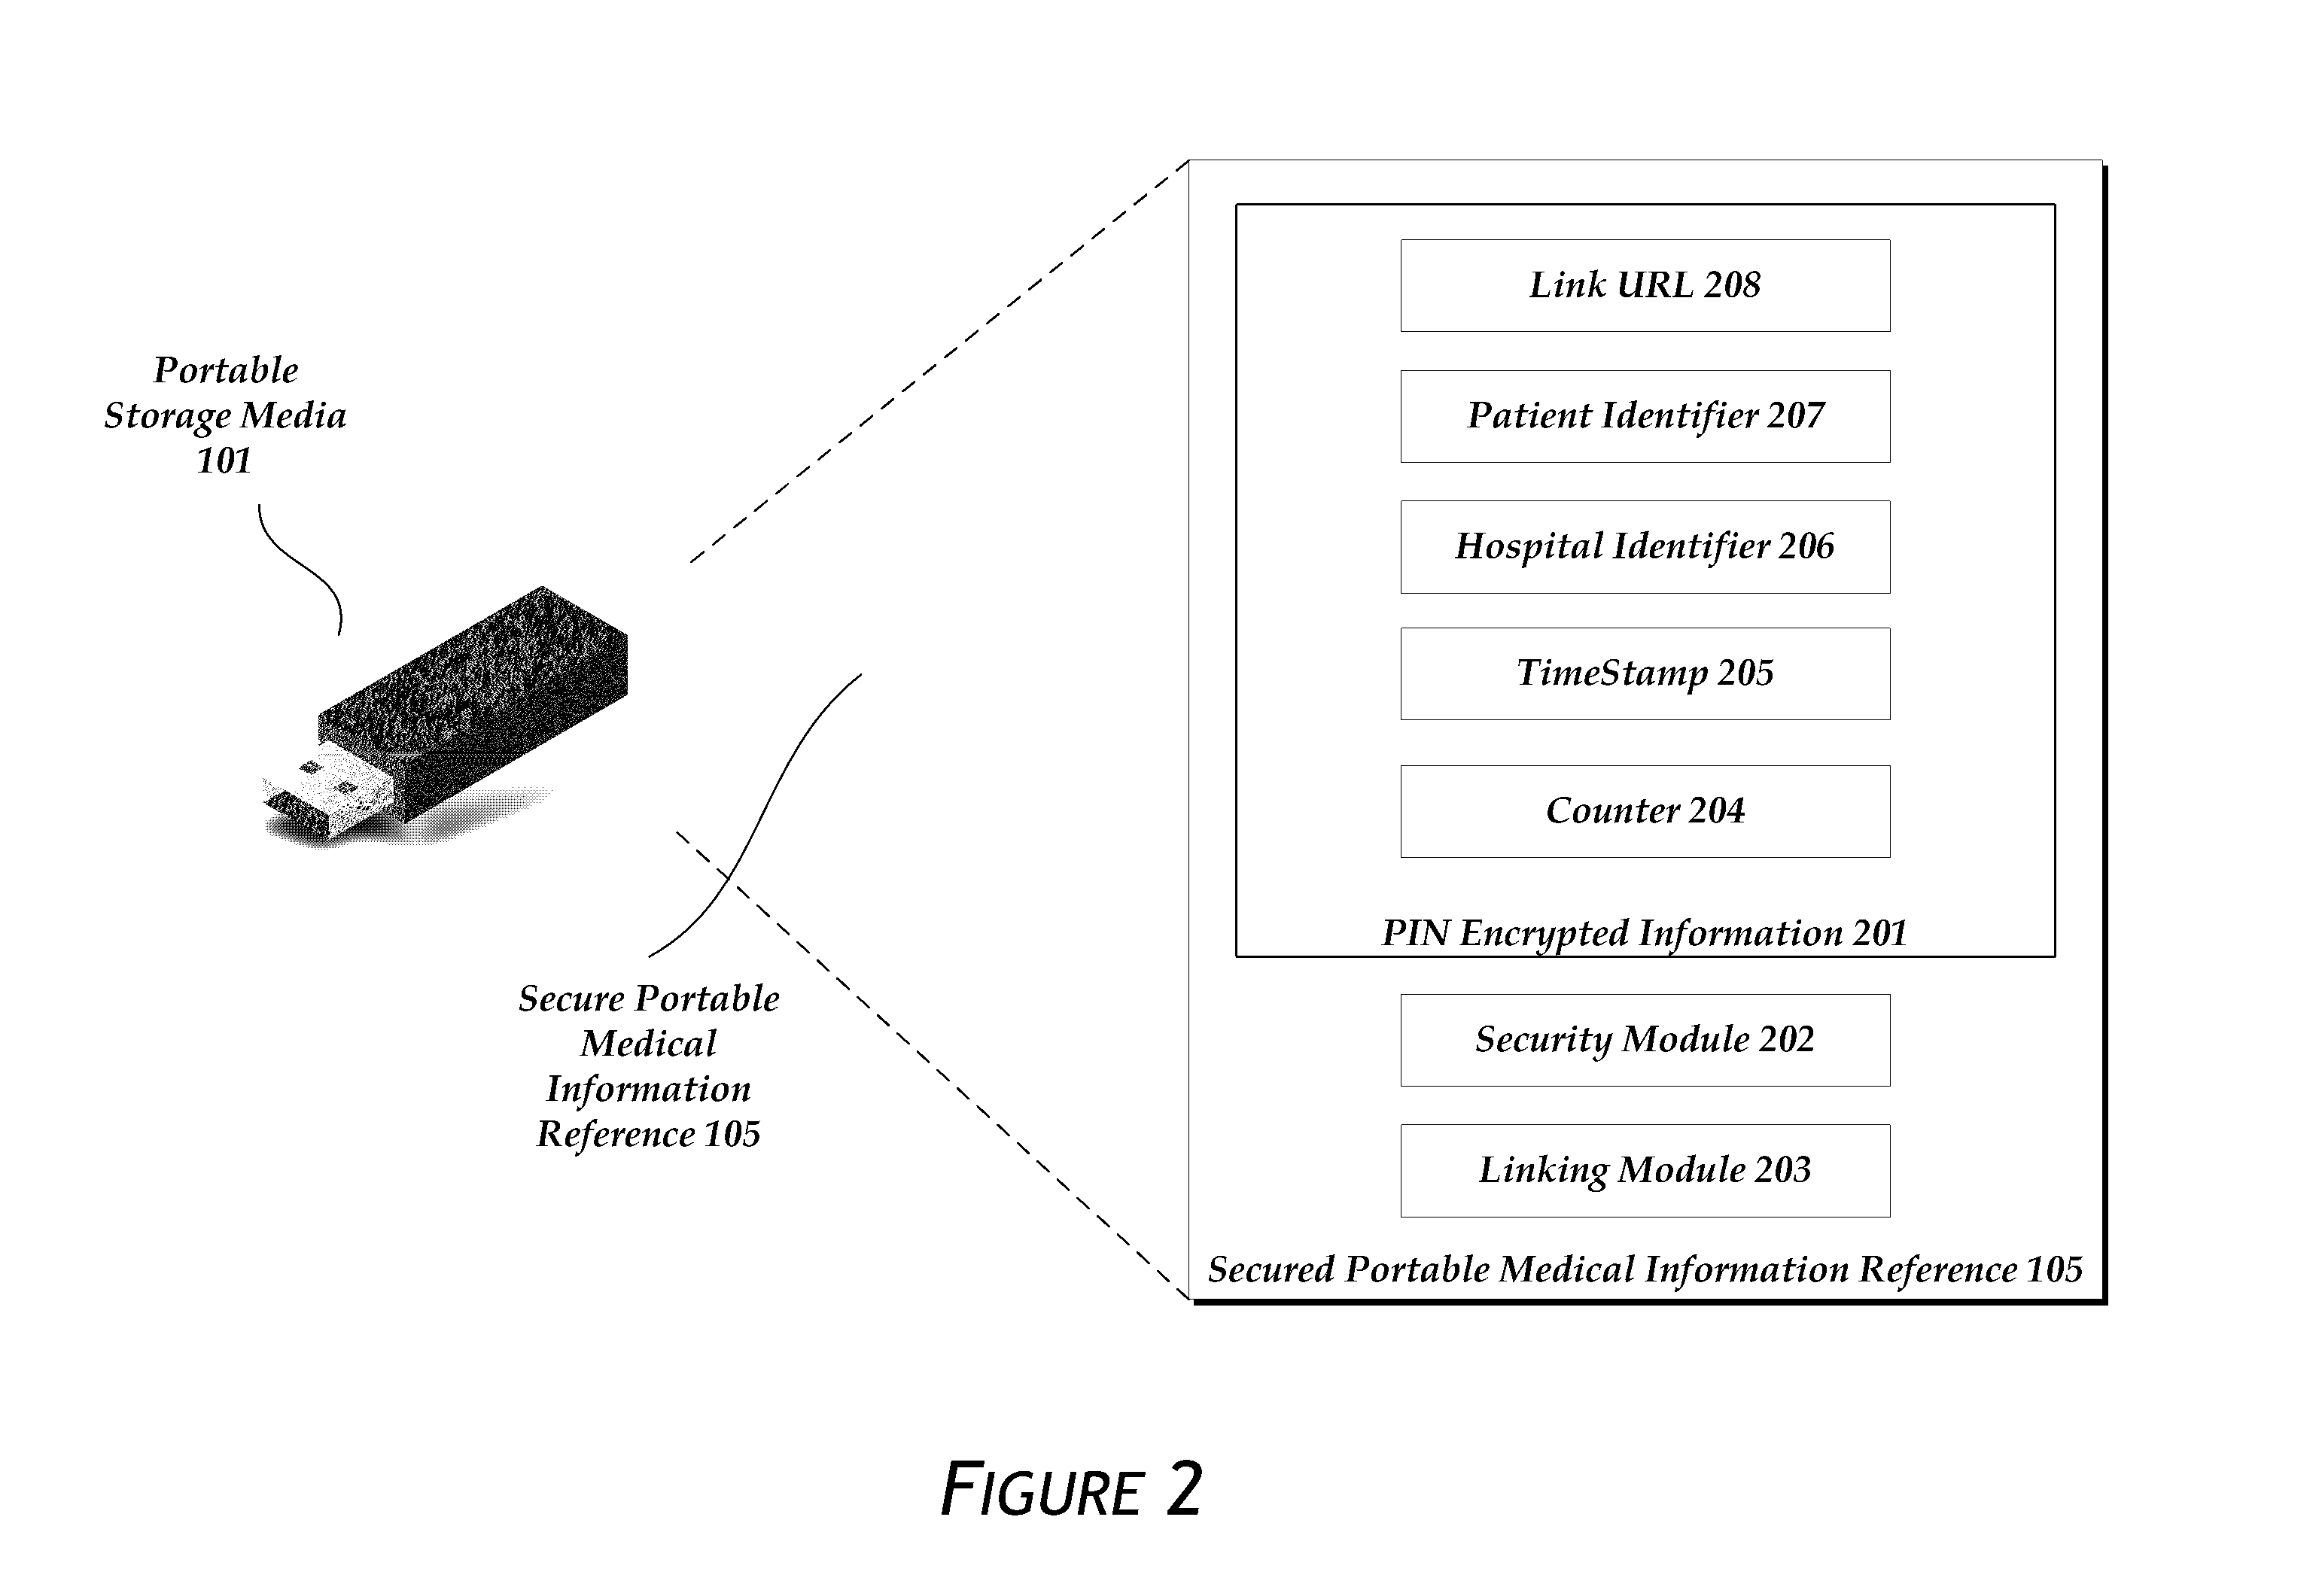 Secure portable medical information system and methods related thereto